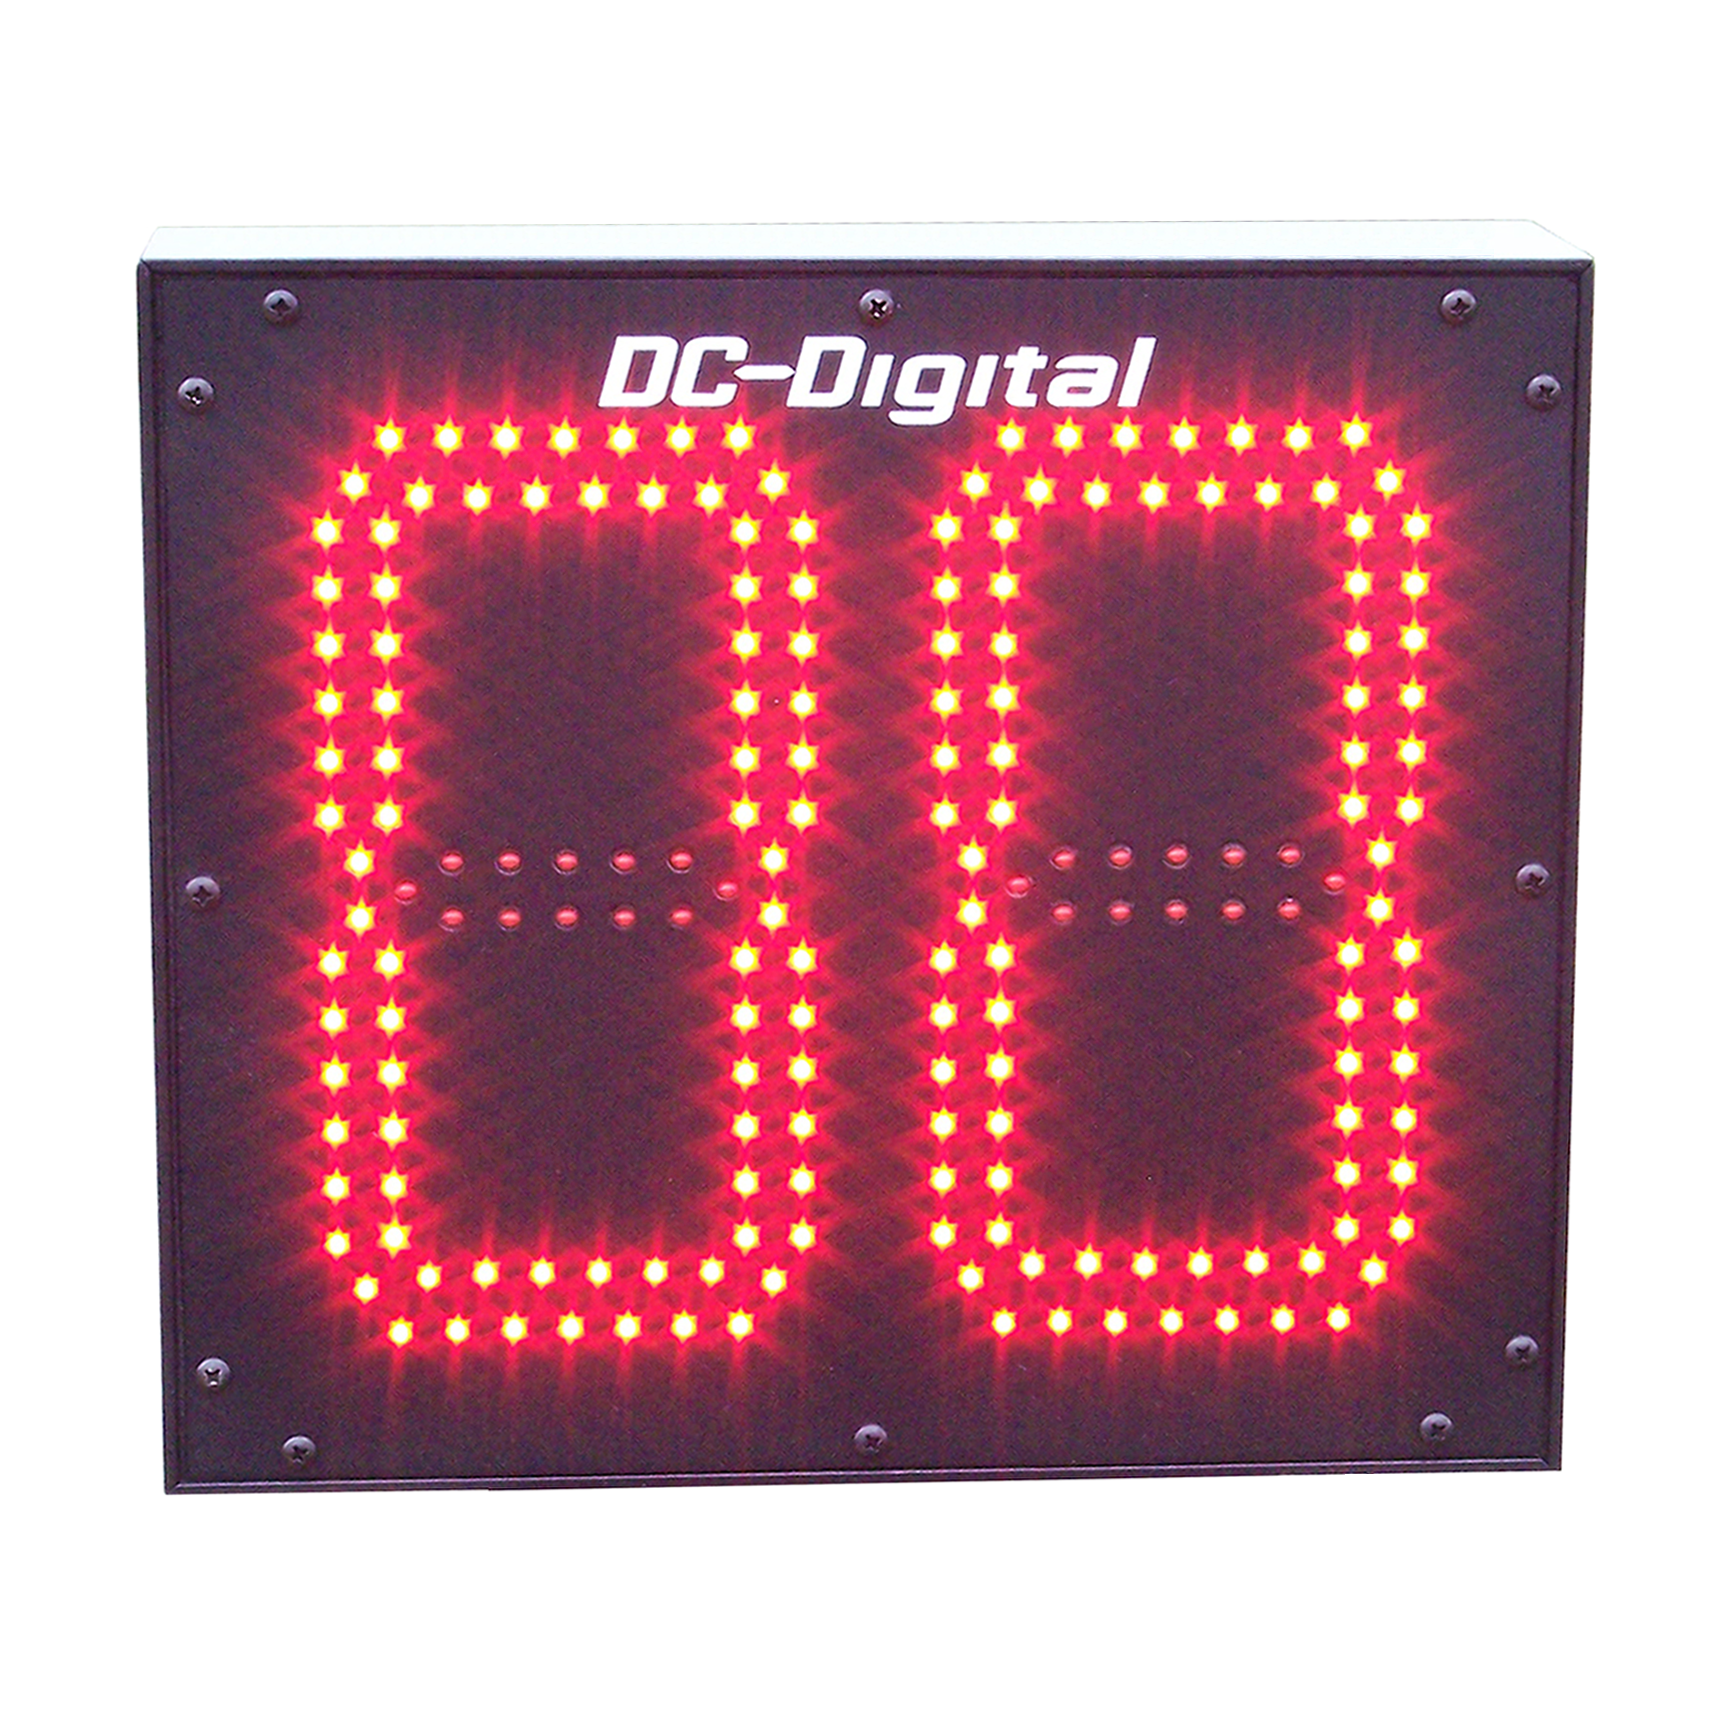 2-Digit, 8 inch outdoor Countdown timer with hard coded for 24 seconds